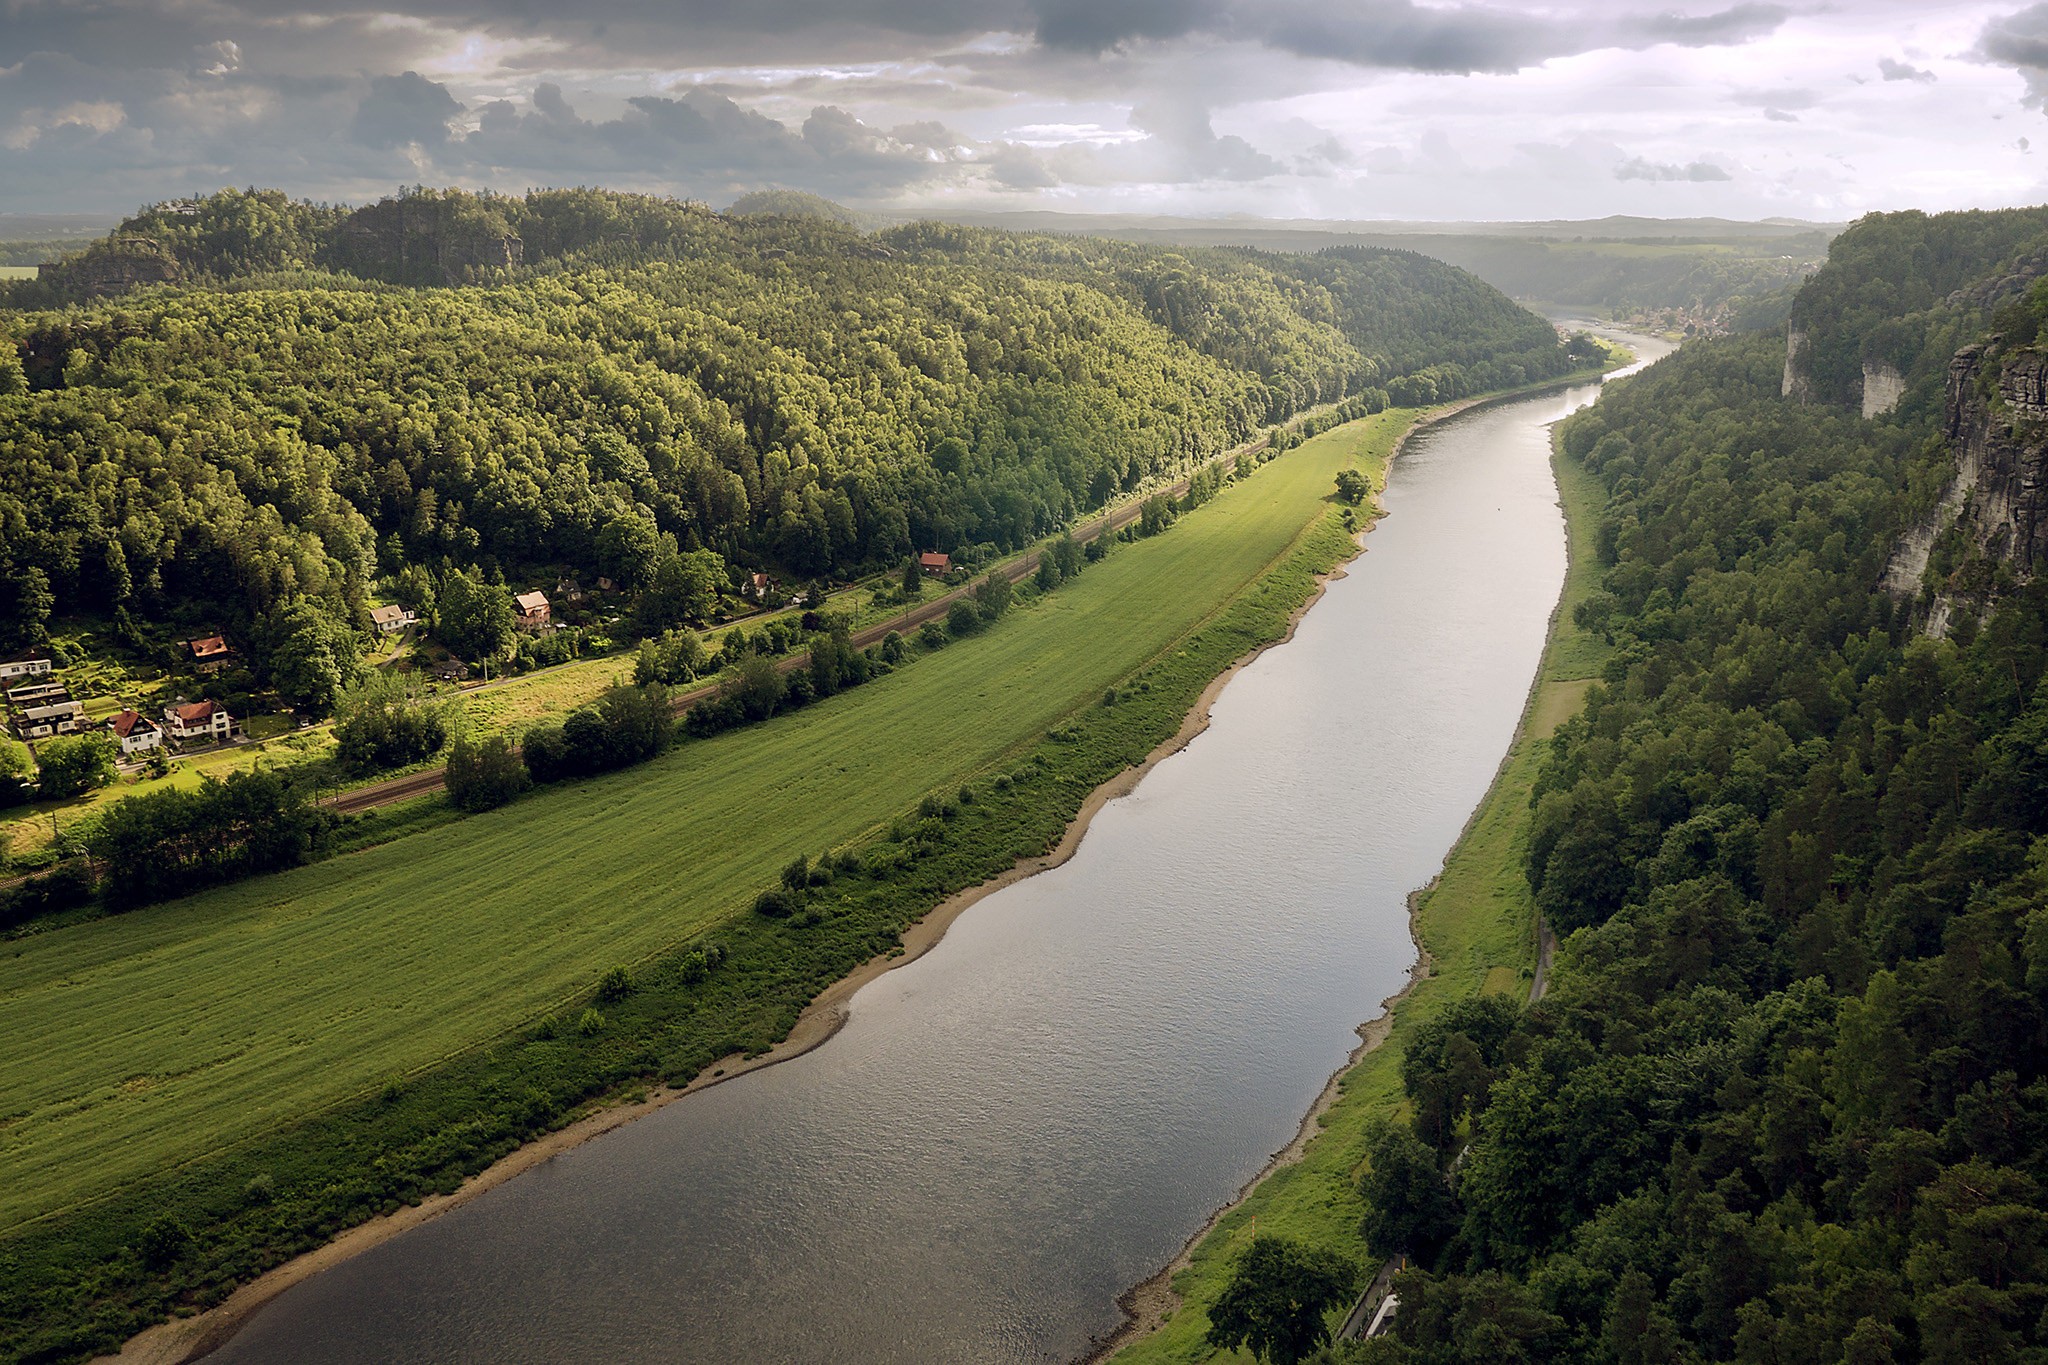 General 2048x1365 landscape river valley aerial view forest